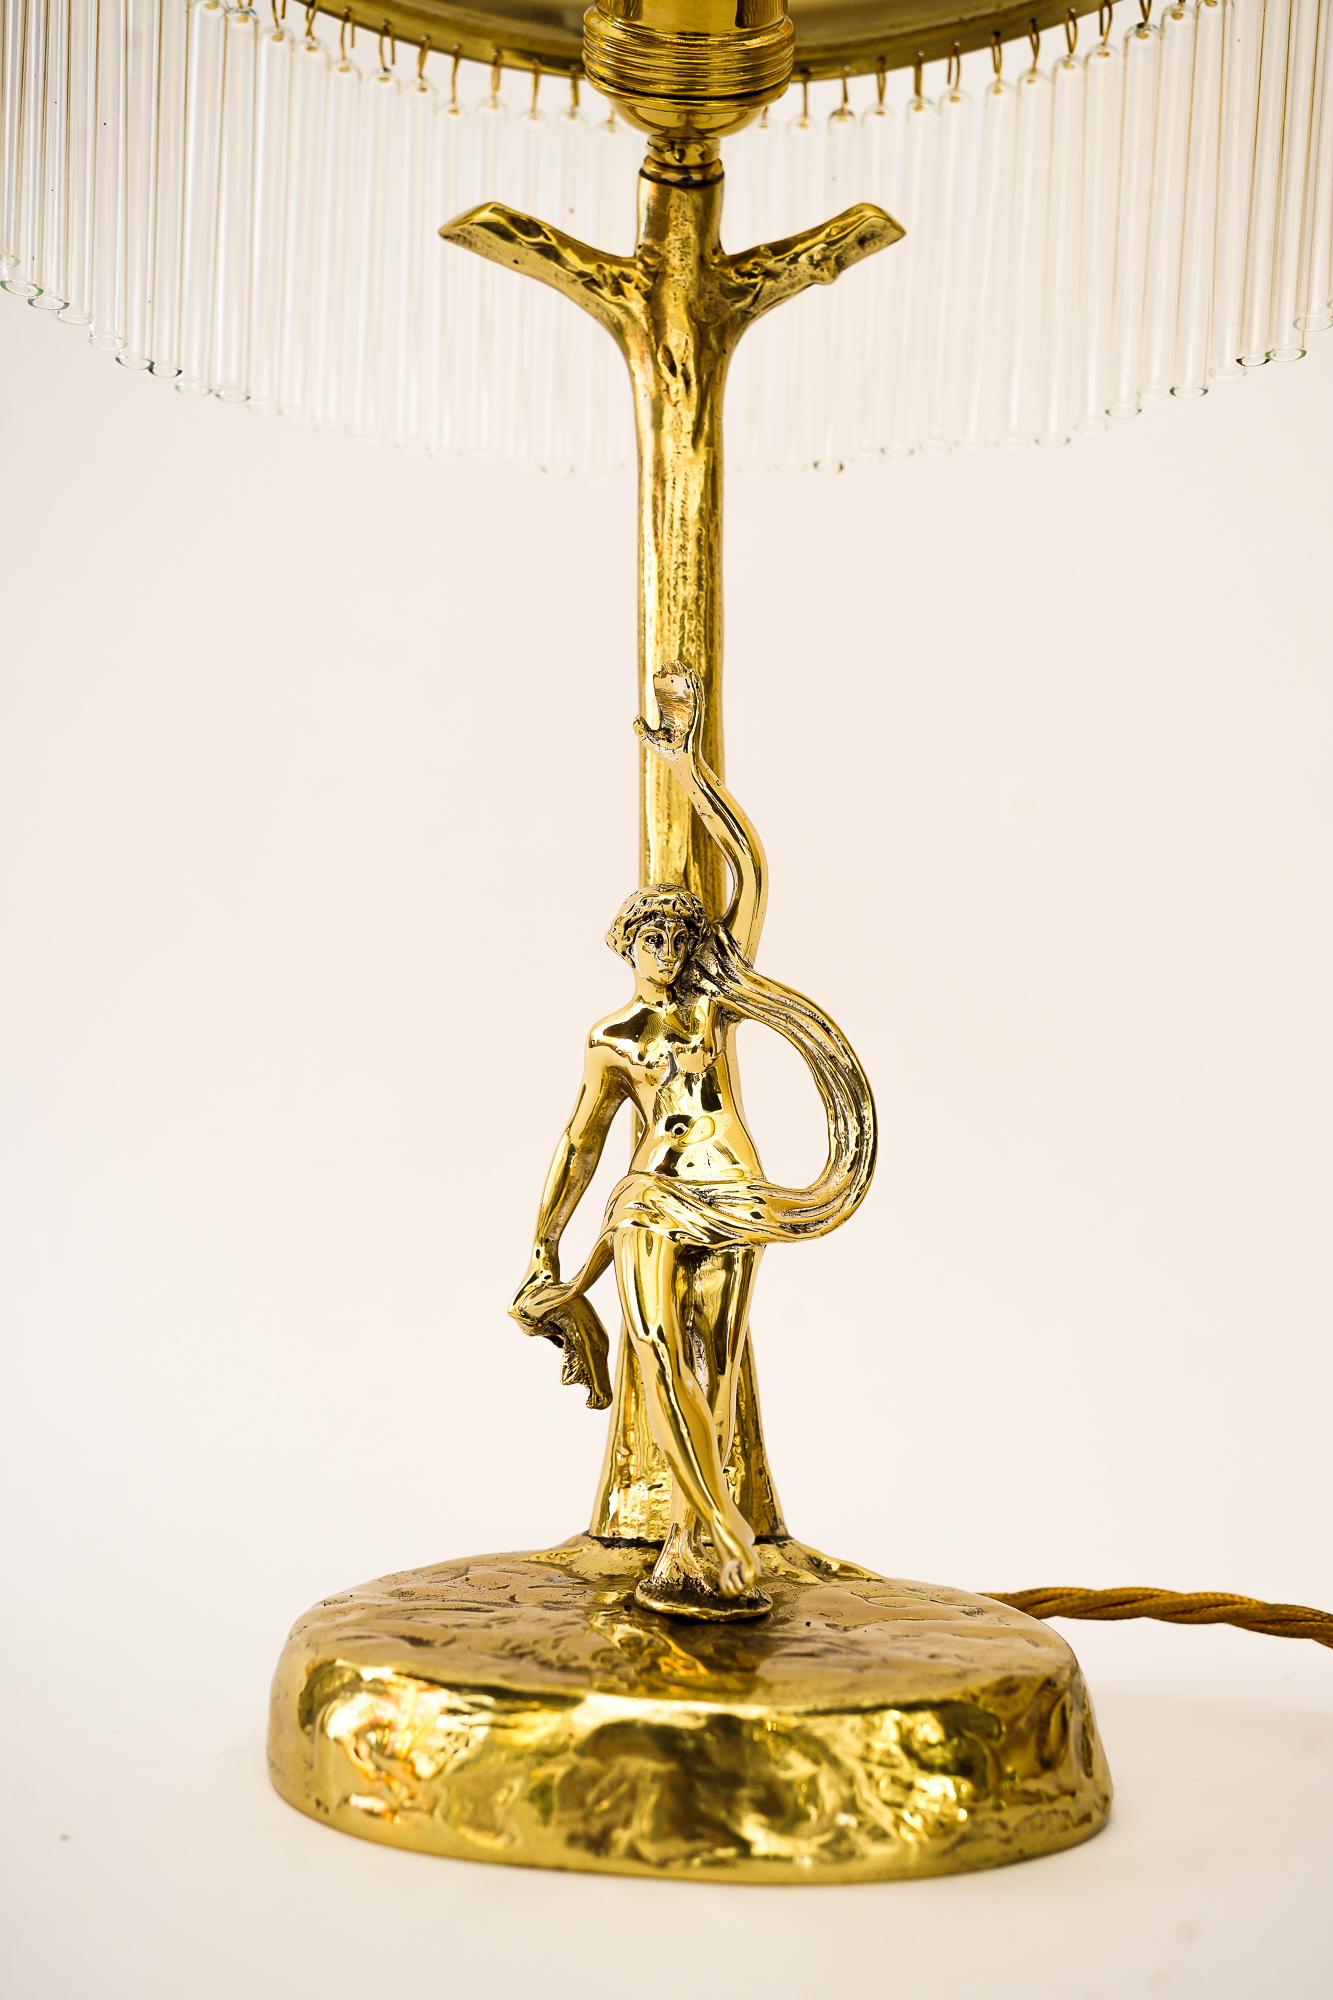 Jugendstil Table lamp with original antique glass shade, Vienna, around 1910s
Brass polished and stove enameled.
The glass sticks are replaced (new).